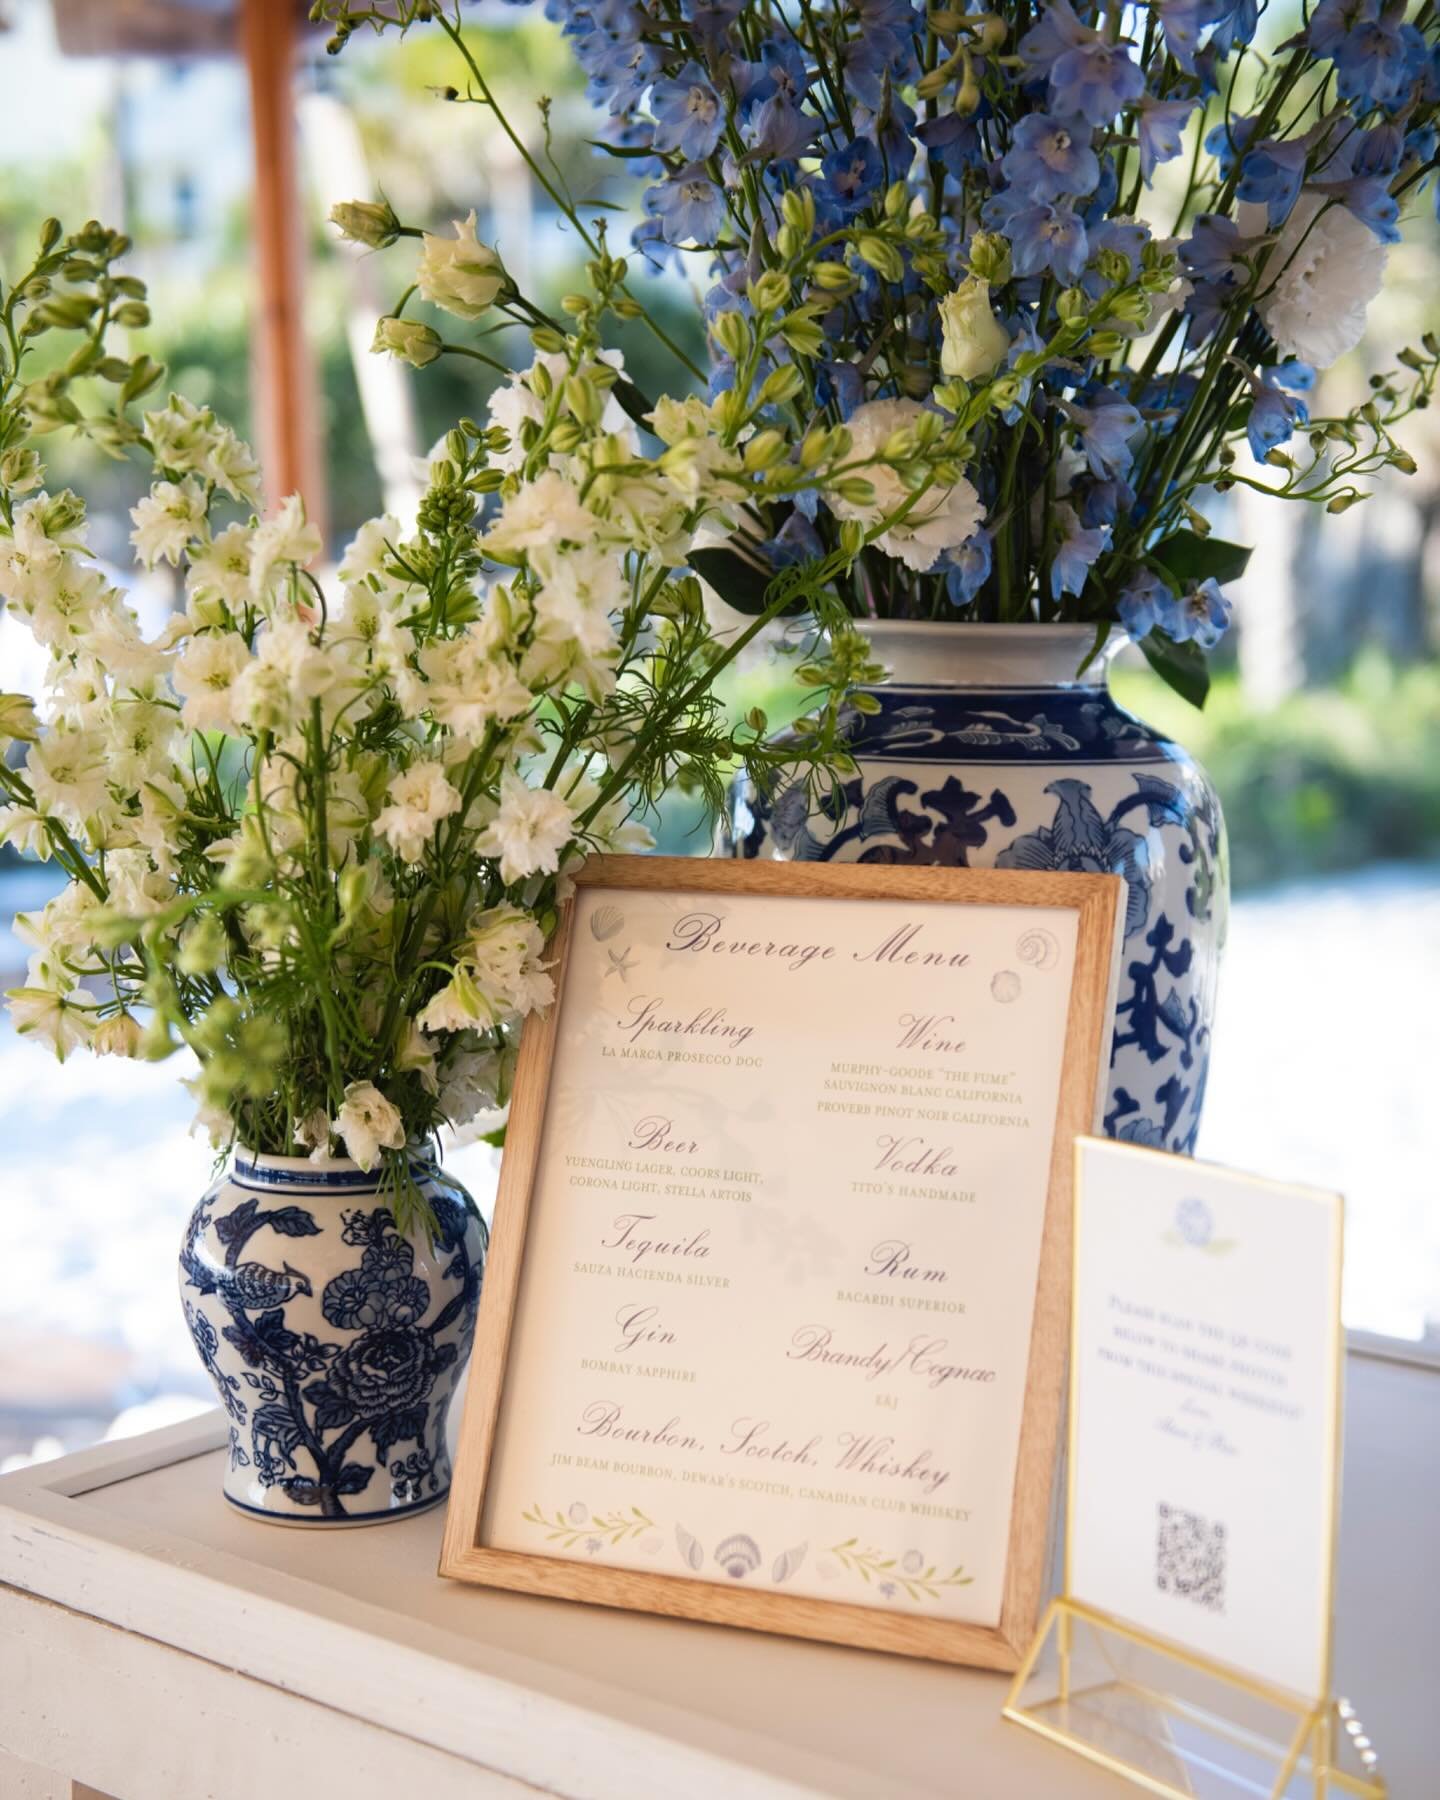 ✨ It&rsquo;s all in the details ✨ 

Bar arrangements and signage add an extra touch of elegance and whimsy to your wedding day! From personalized cocktails to charming signage and floral arrangements that match your wedding esthetics, these elements 